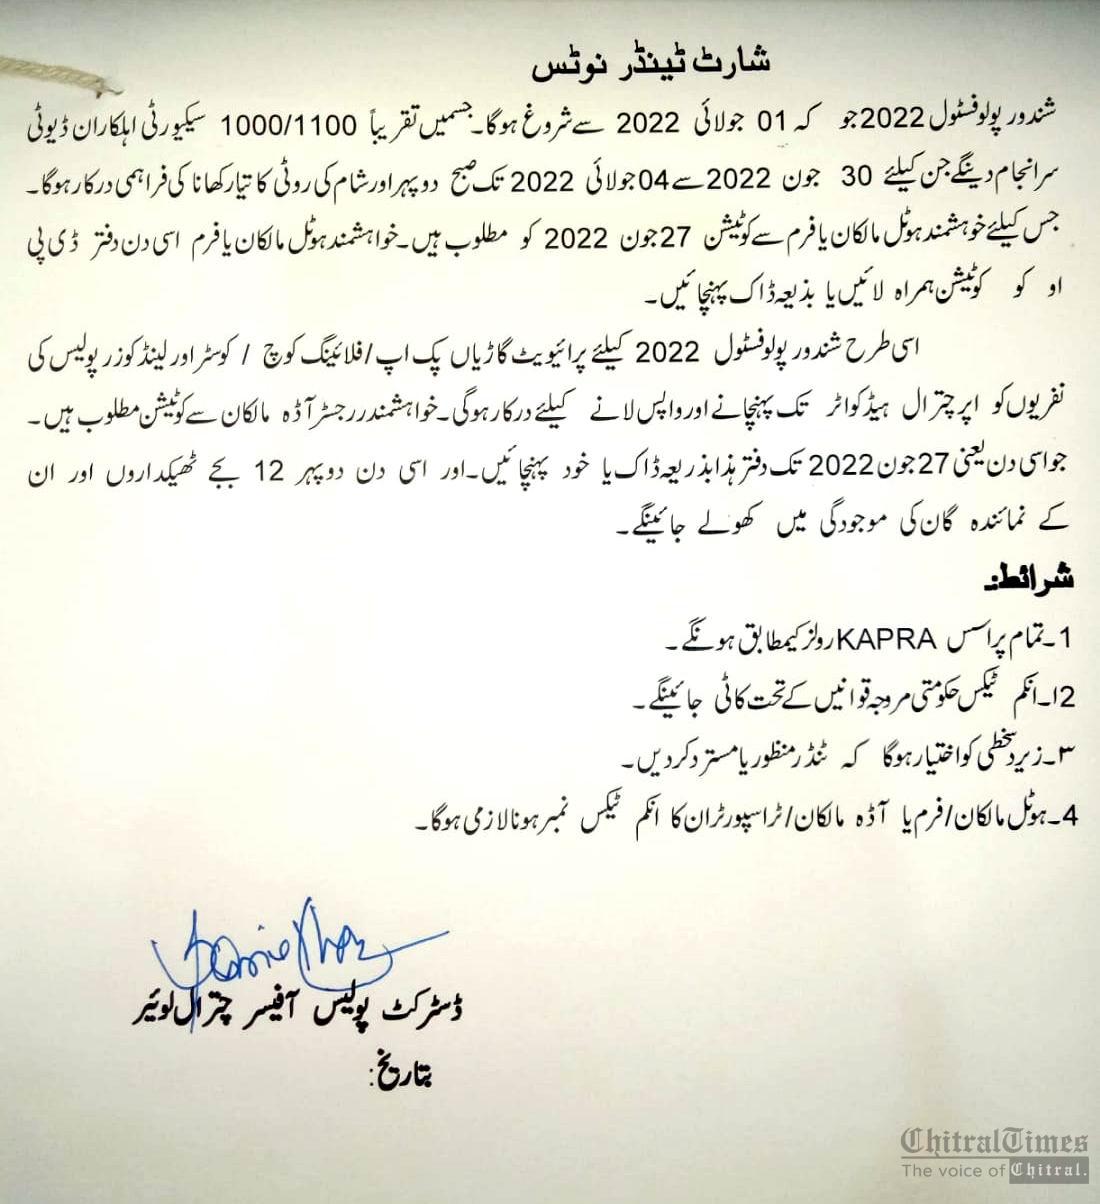 chitraltimes tender for shandur chitral police